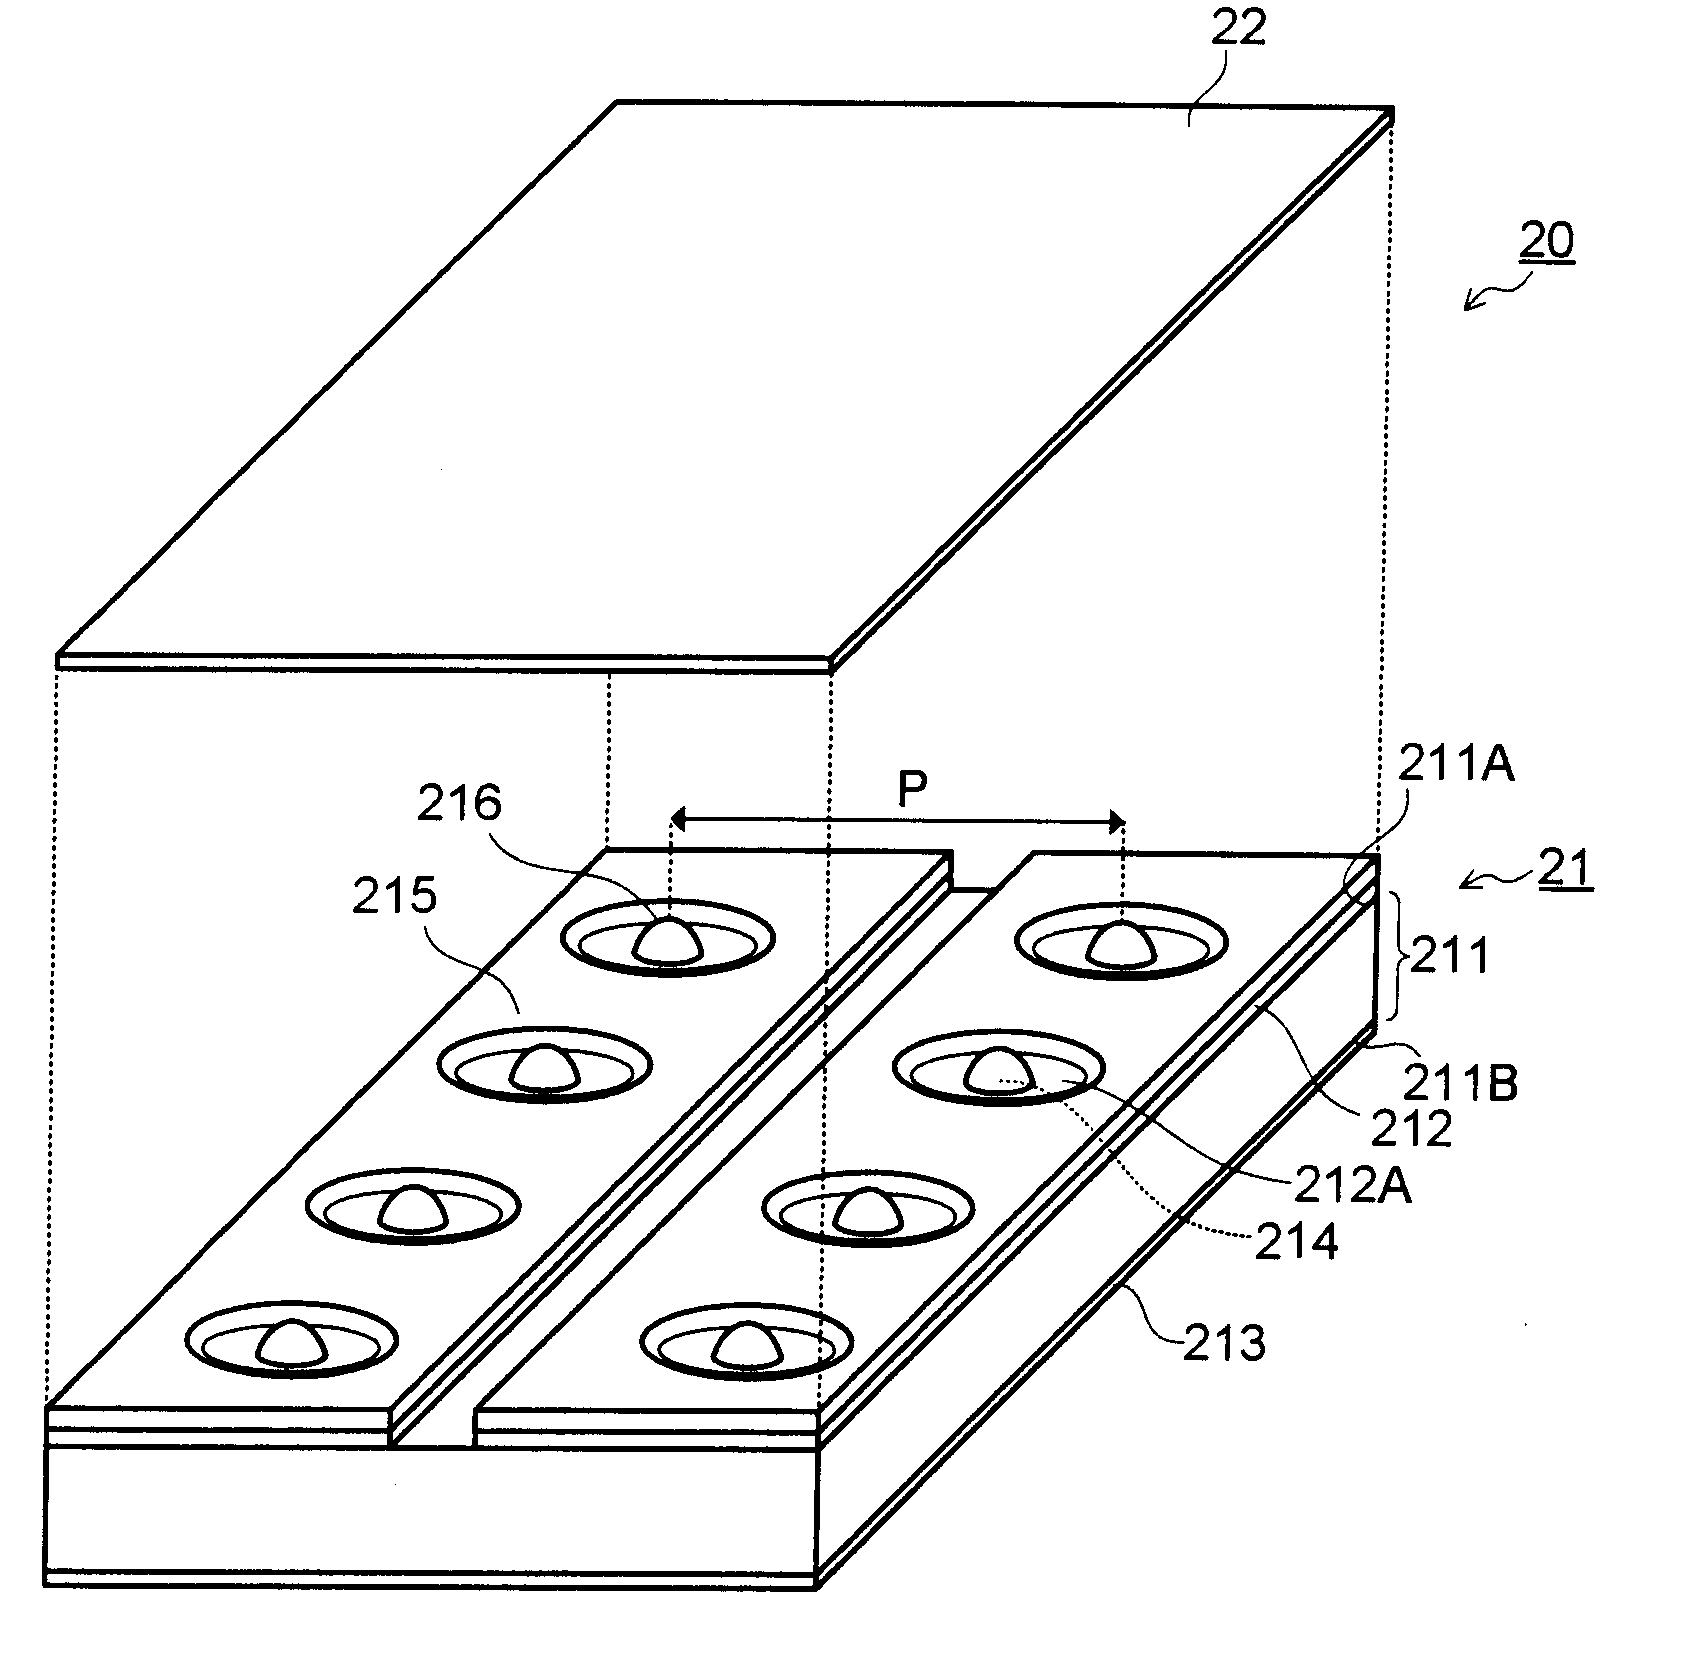 Radiation detector using gas amplication and method for manufacturing the same